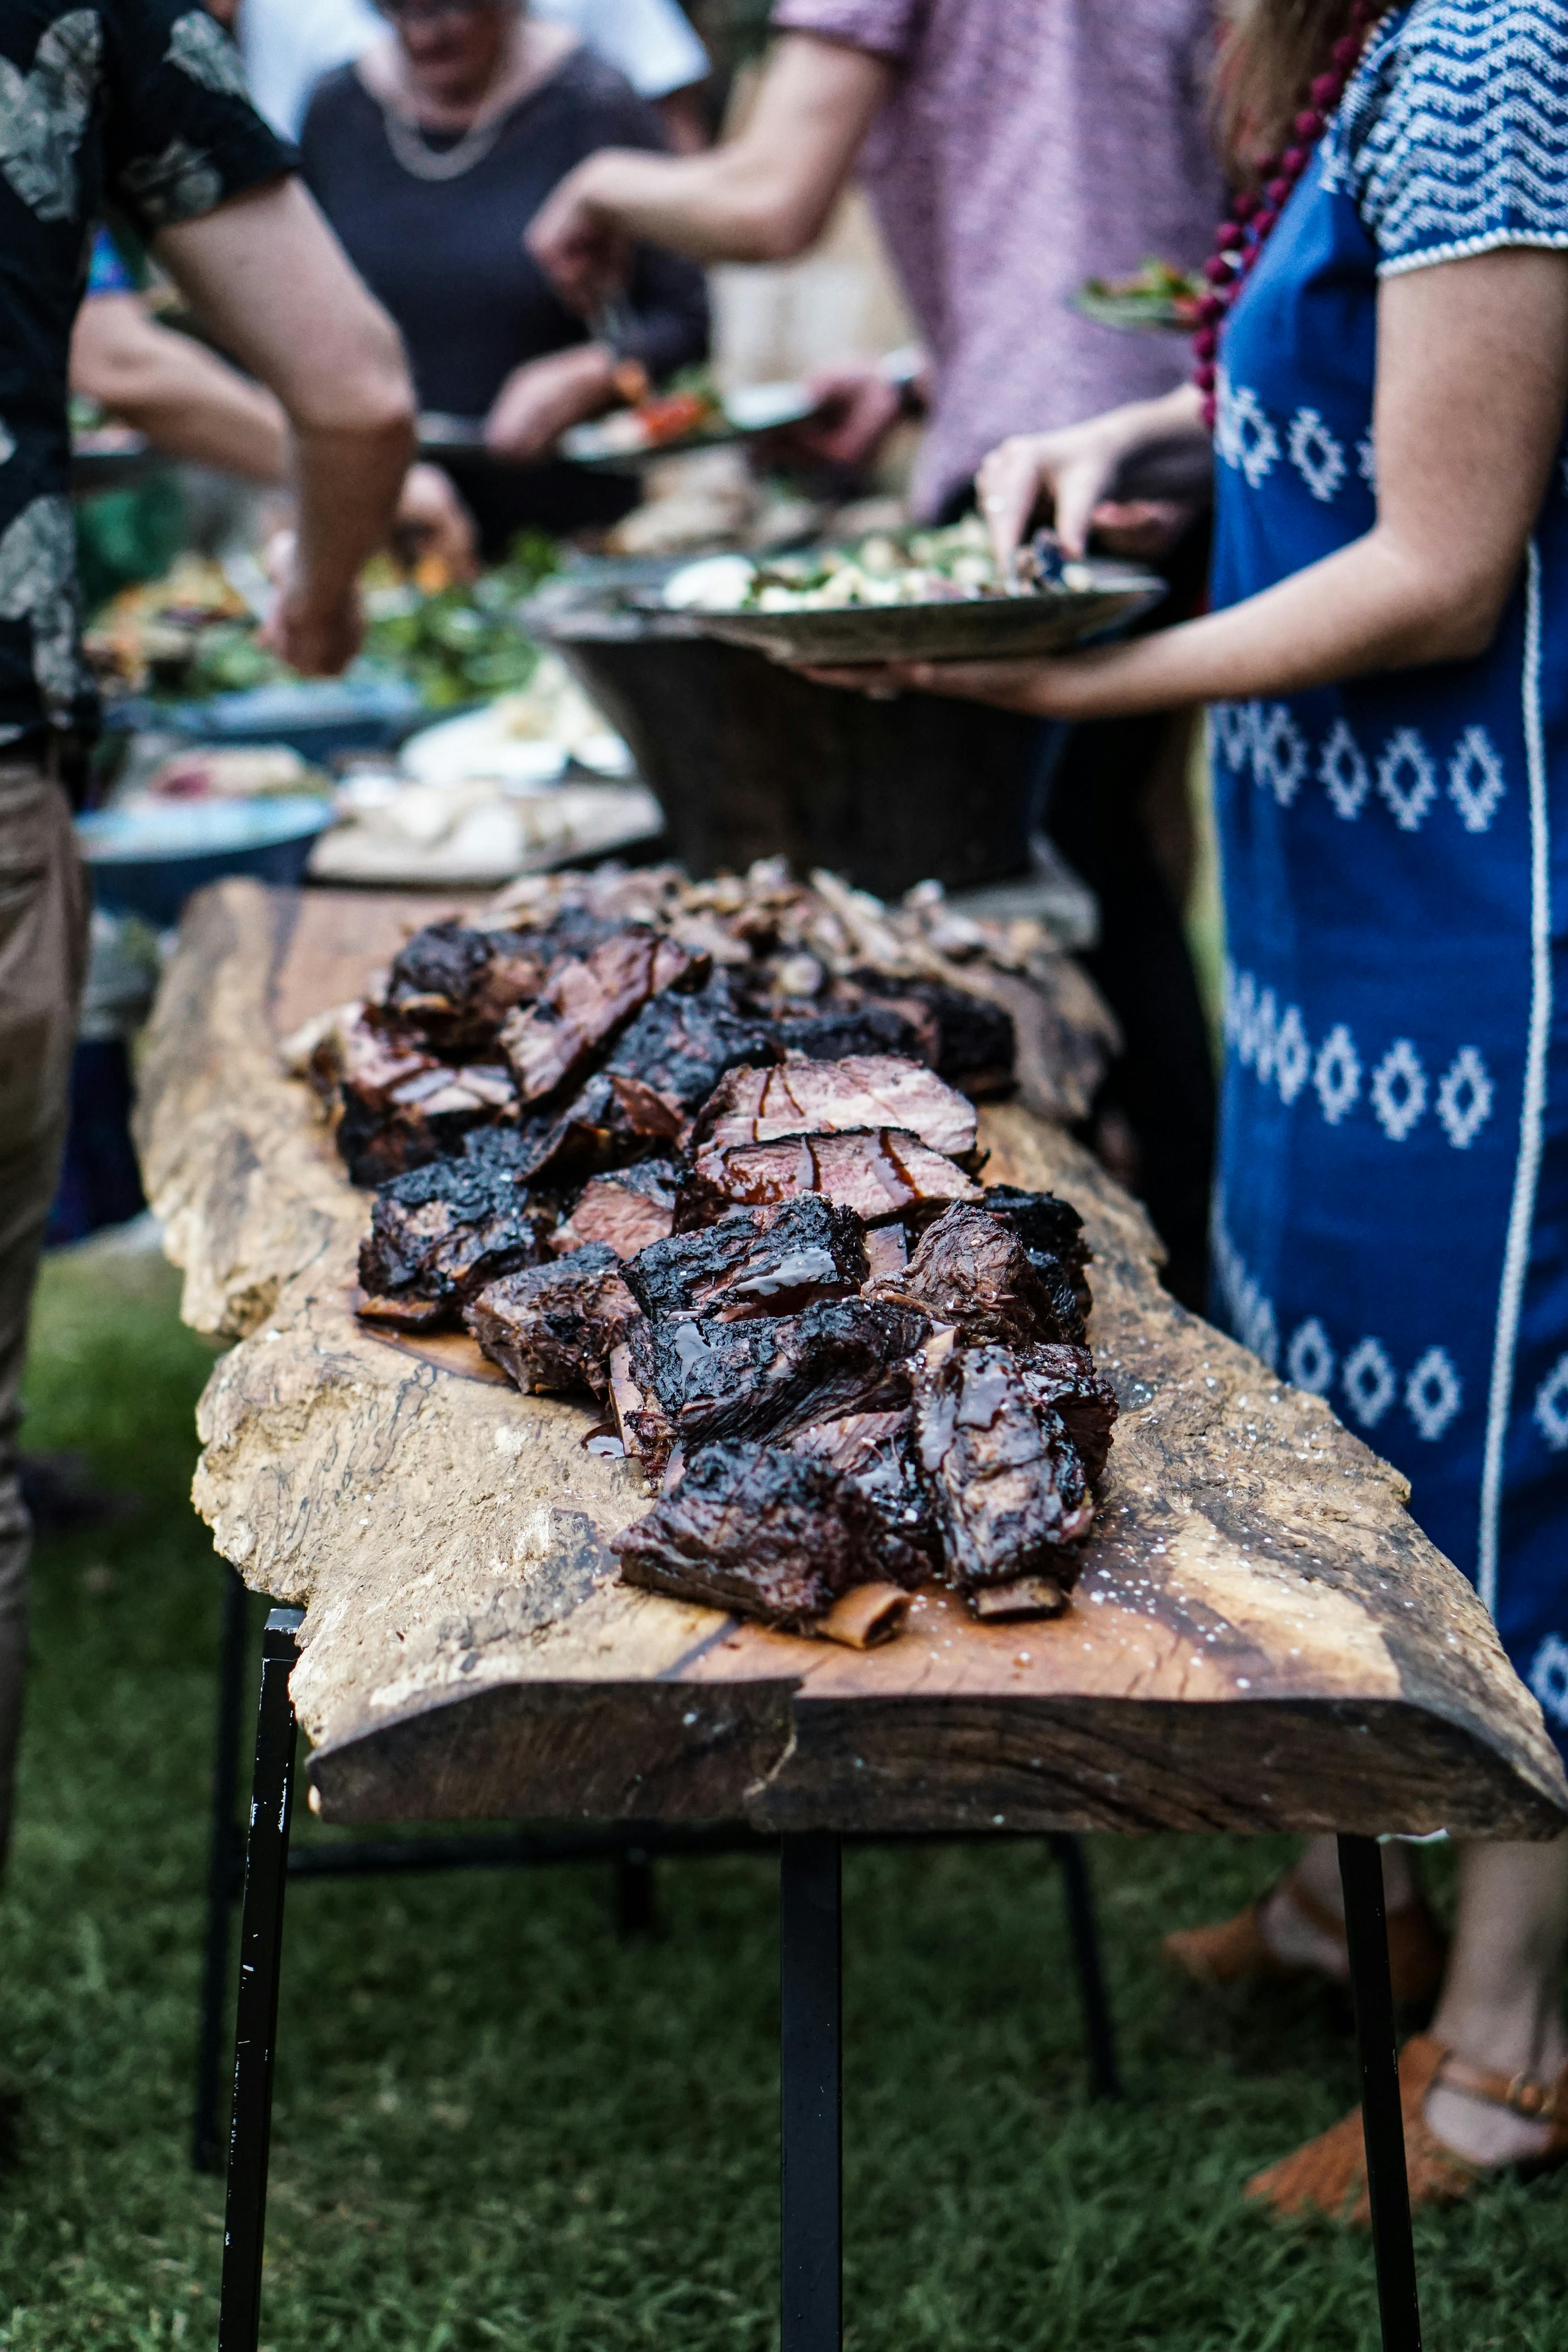 Family enjoying a barbecue | Source: Pexels